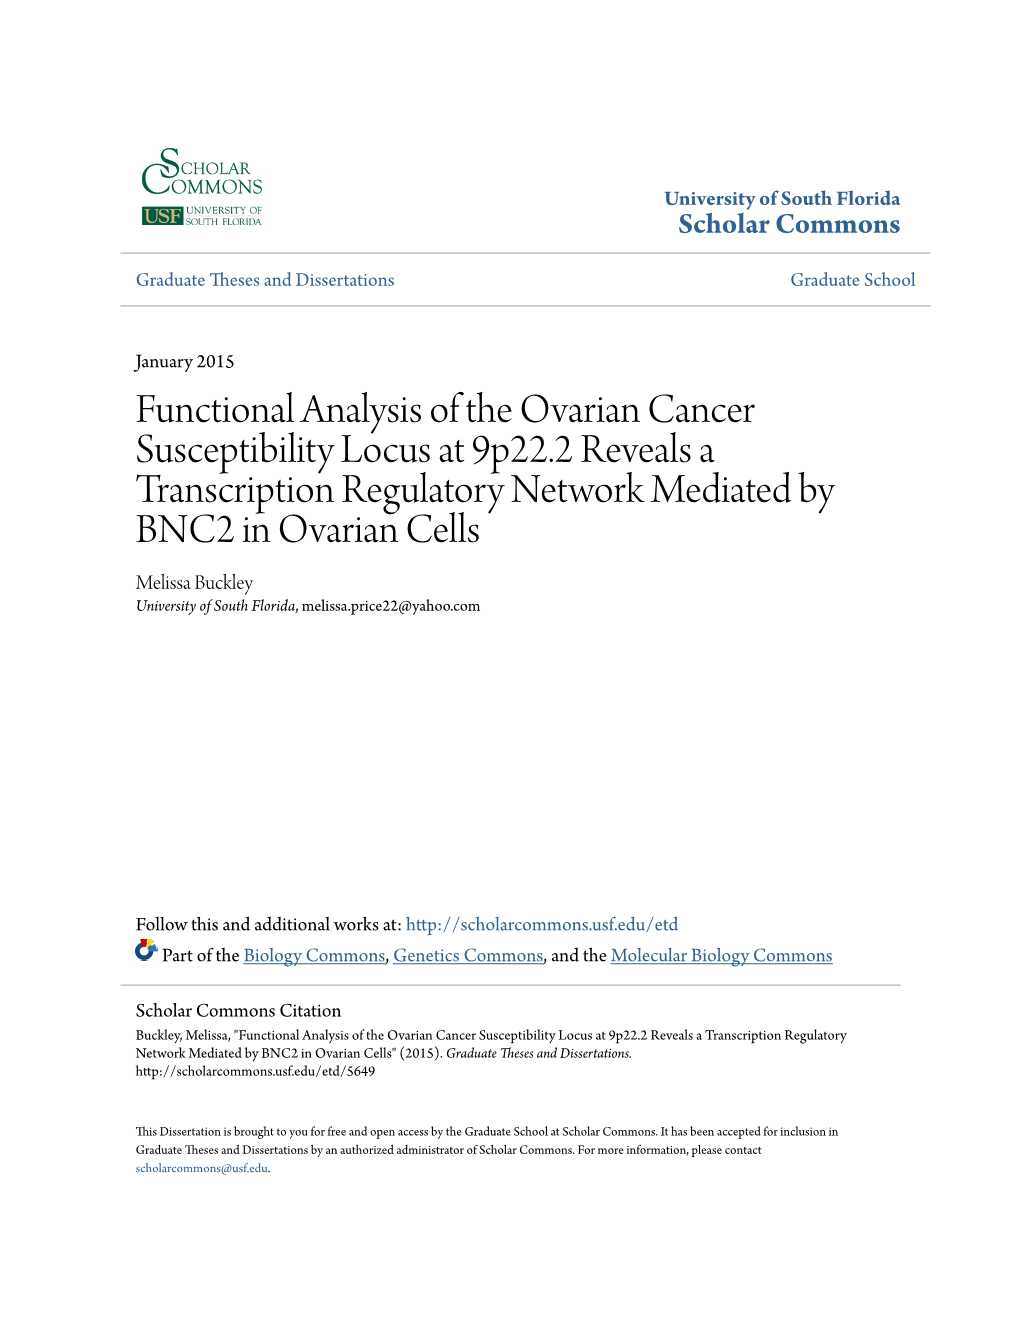 Functional Analysis of the Ovarian Cancer Susceptibility Locus at 9P22